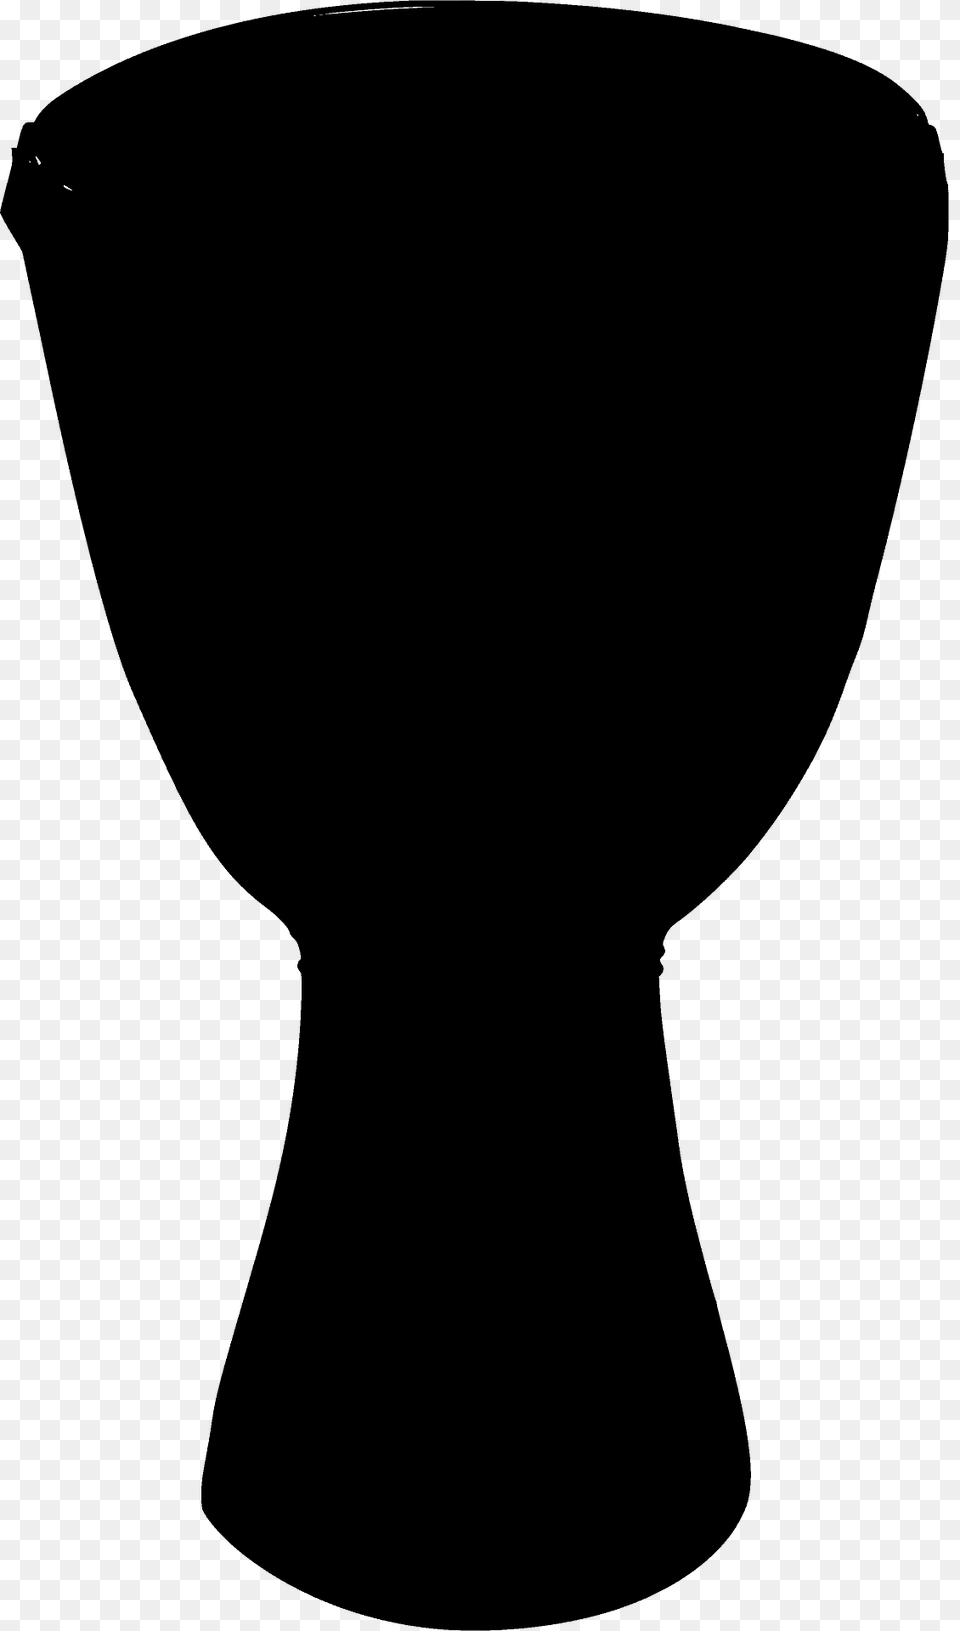 Djembe Drum Silhouette, Glass, Goblet, Musical Instrument, Percussion Png Image